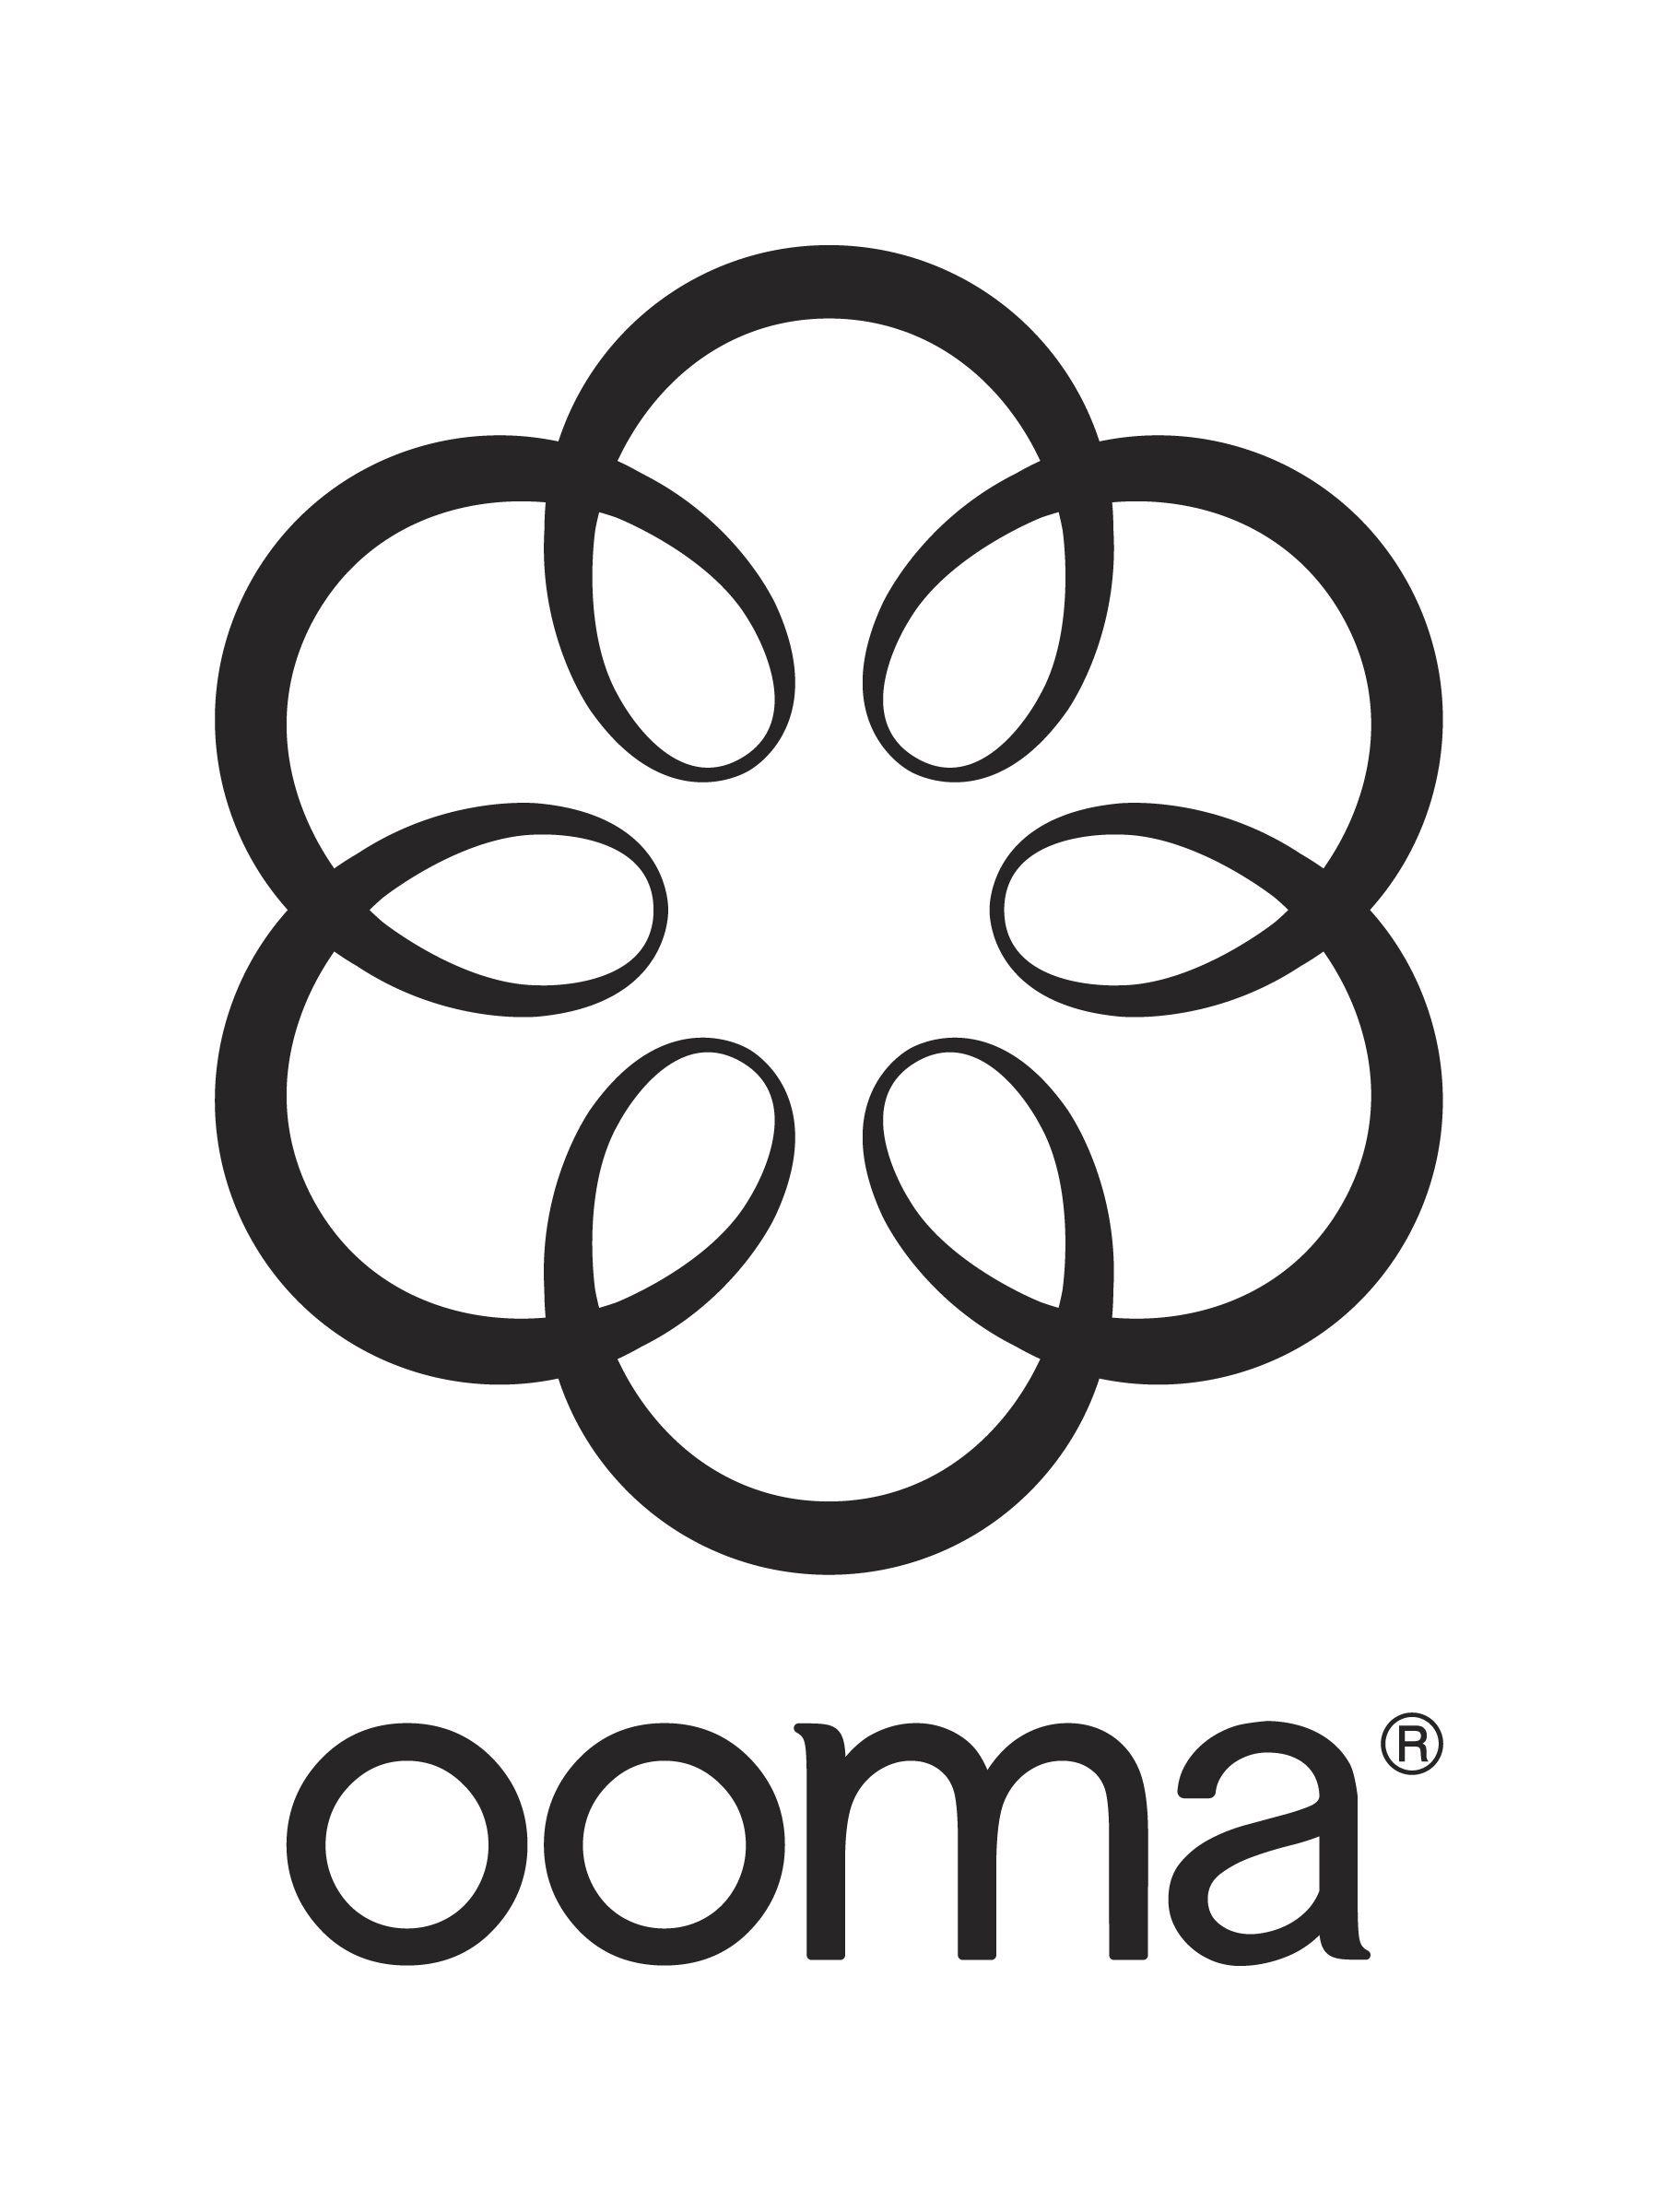 Ooma Logo - Press - Media Assets - Ooma.com - Smart solutions for home and business.